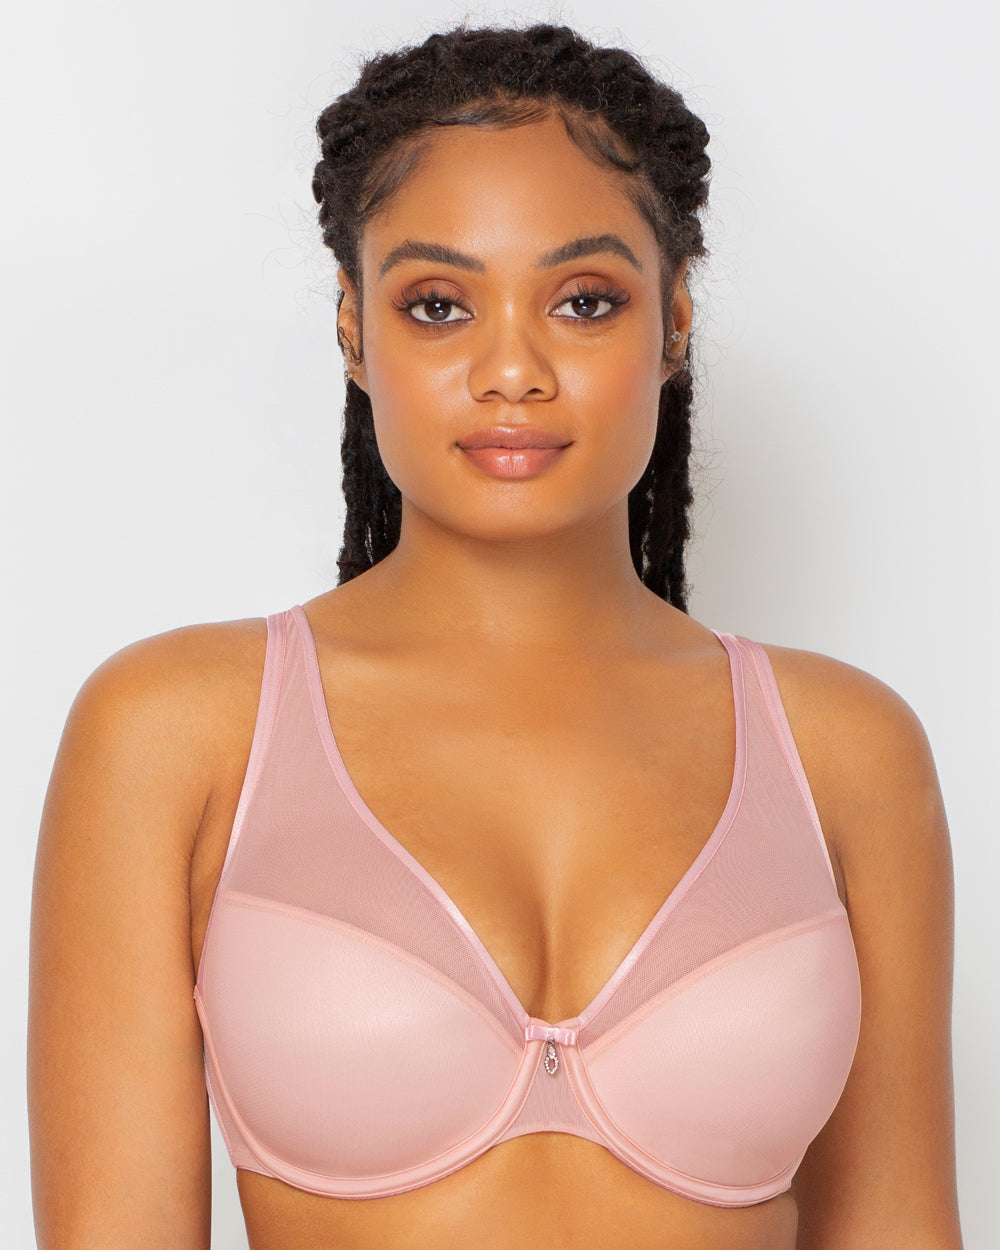 Curvy Couture Women's Sheer Mesh Plunge T-shirt Bra Sun Kissed Coral 34g :  Target